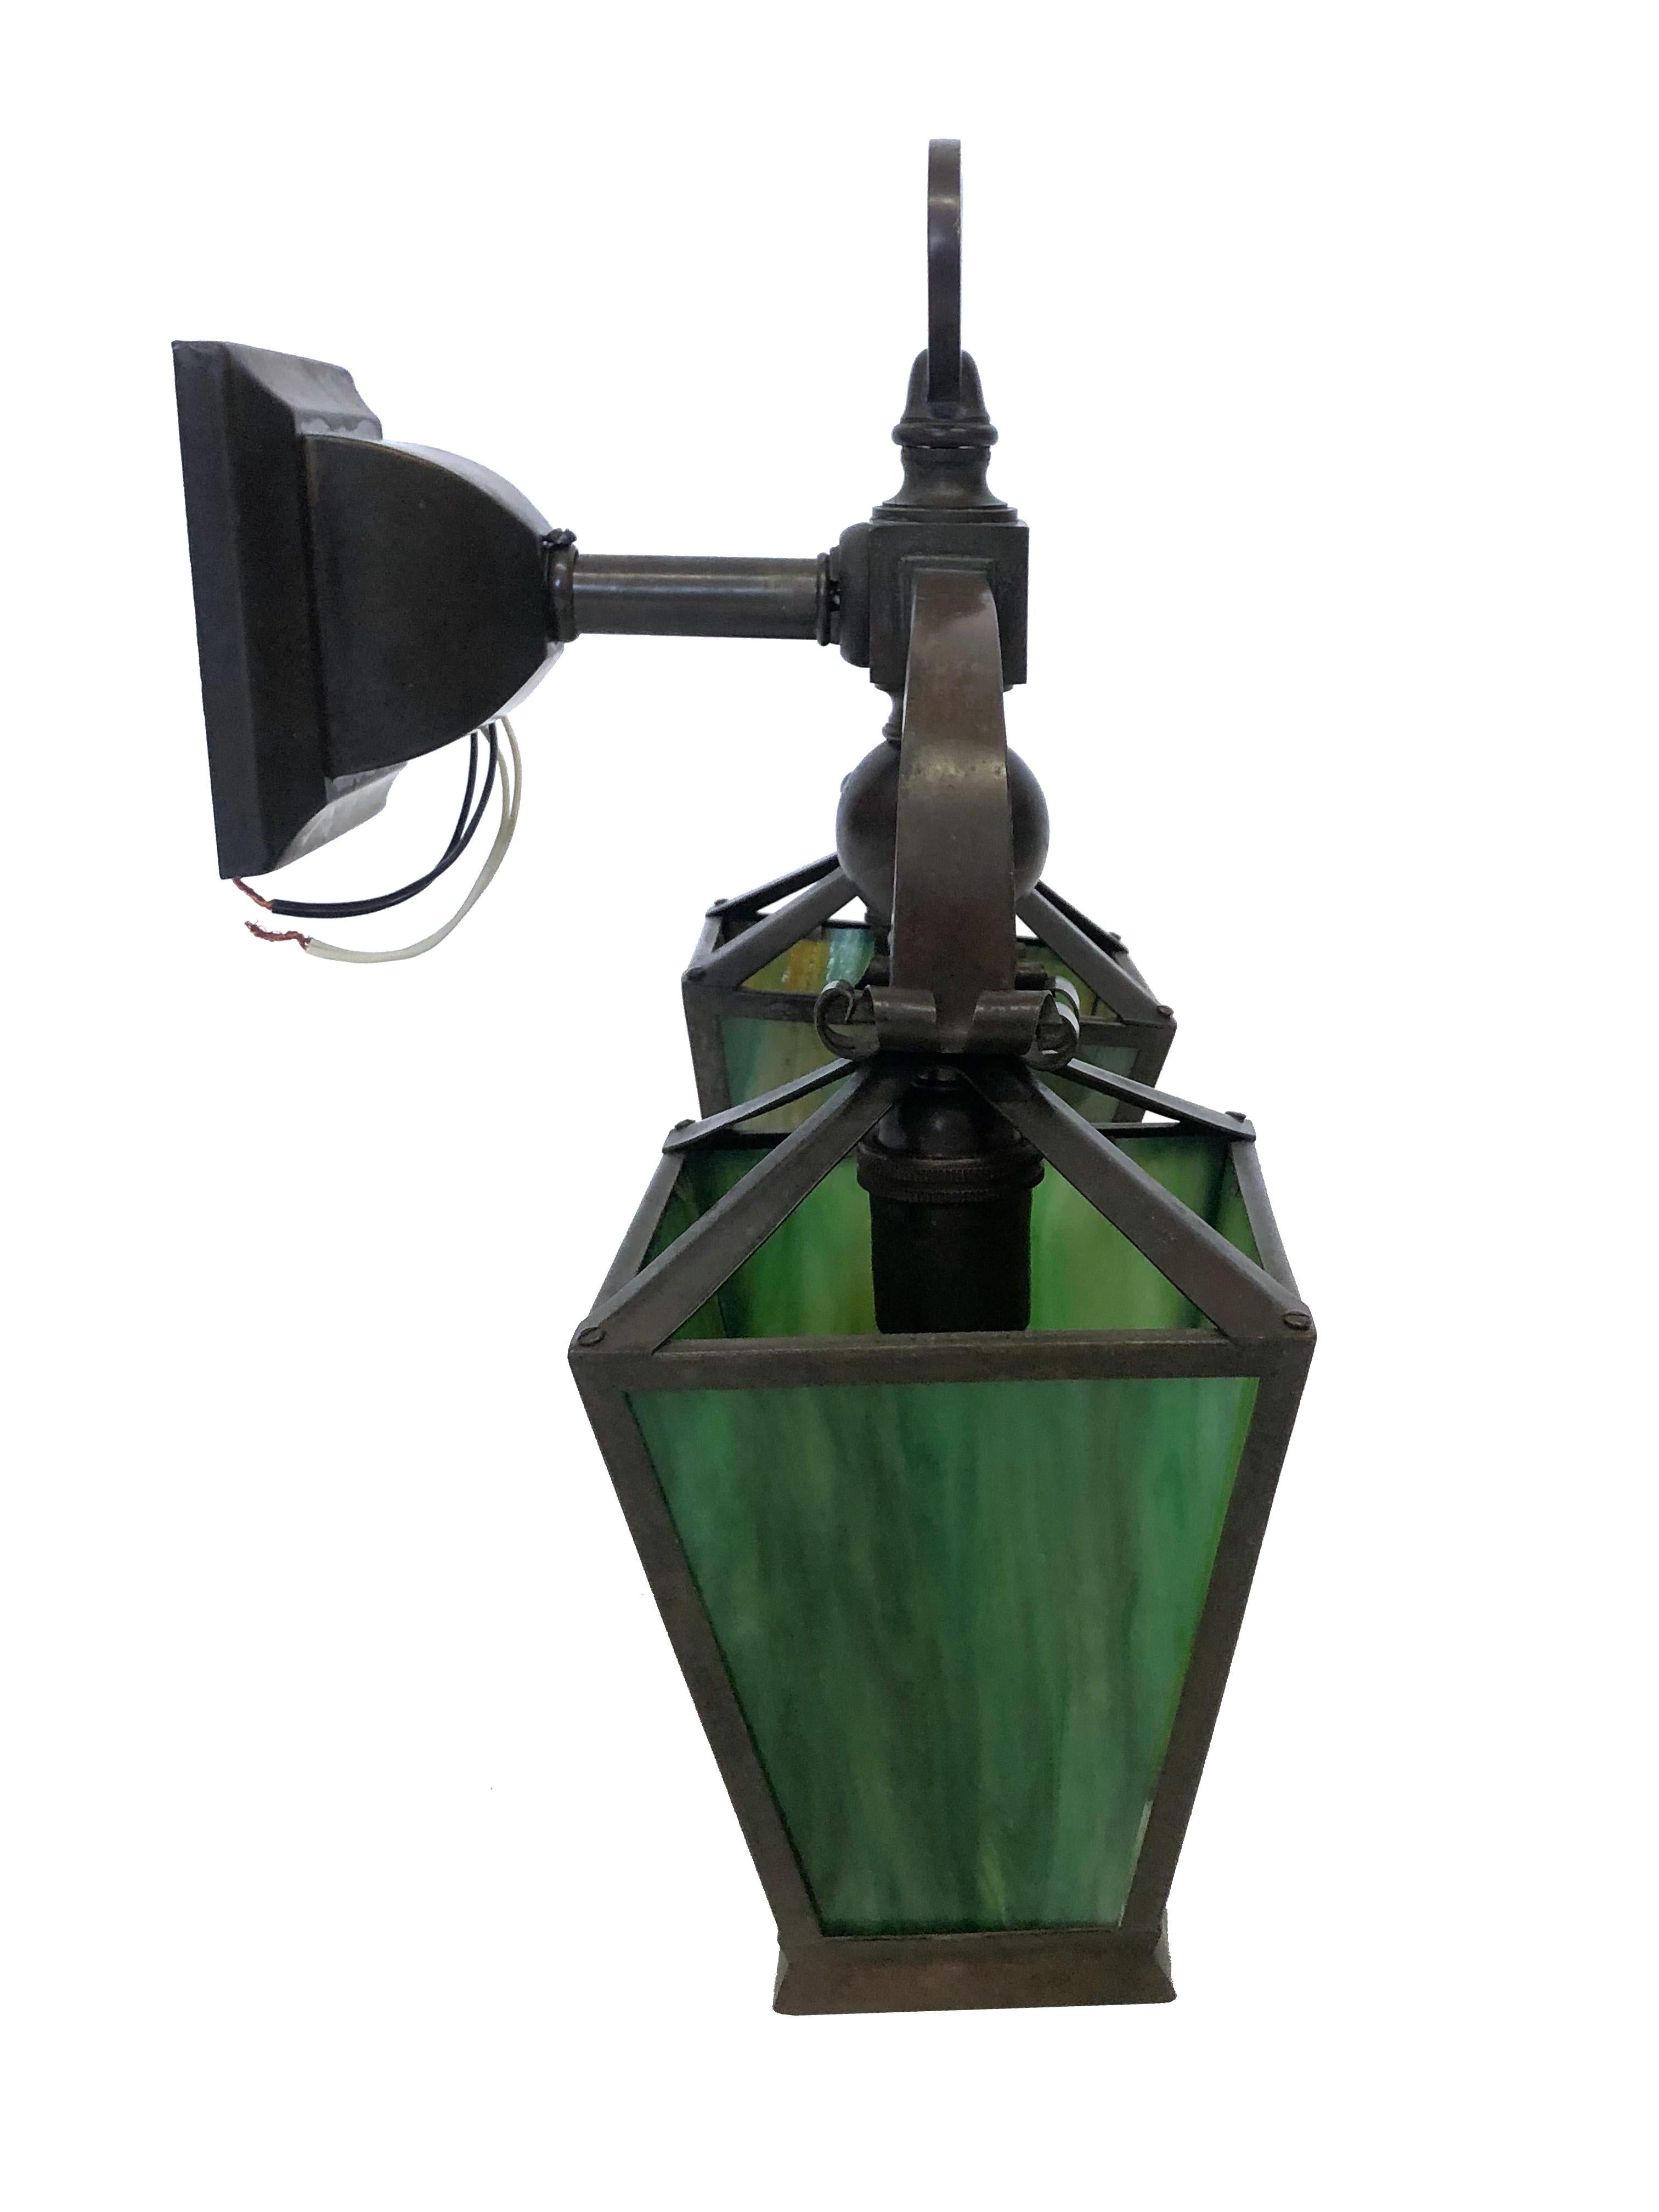 An antique Arts and Crafts double-light sconce, with tapered four-sided green marbled glass lantern shades. The metalwork in this piece is all in age-darkened brass, circa 1920.
Measures: Overall: 15